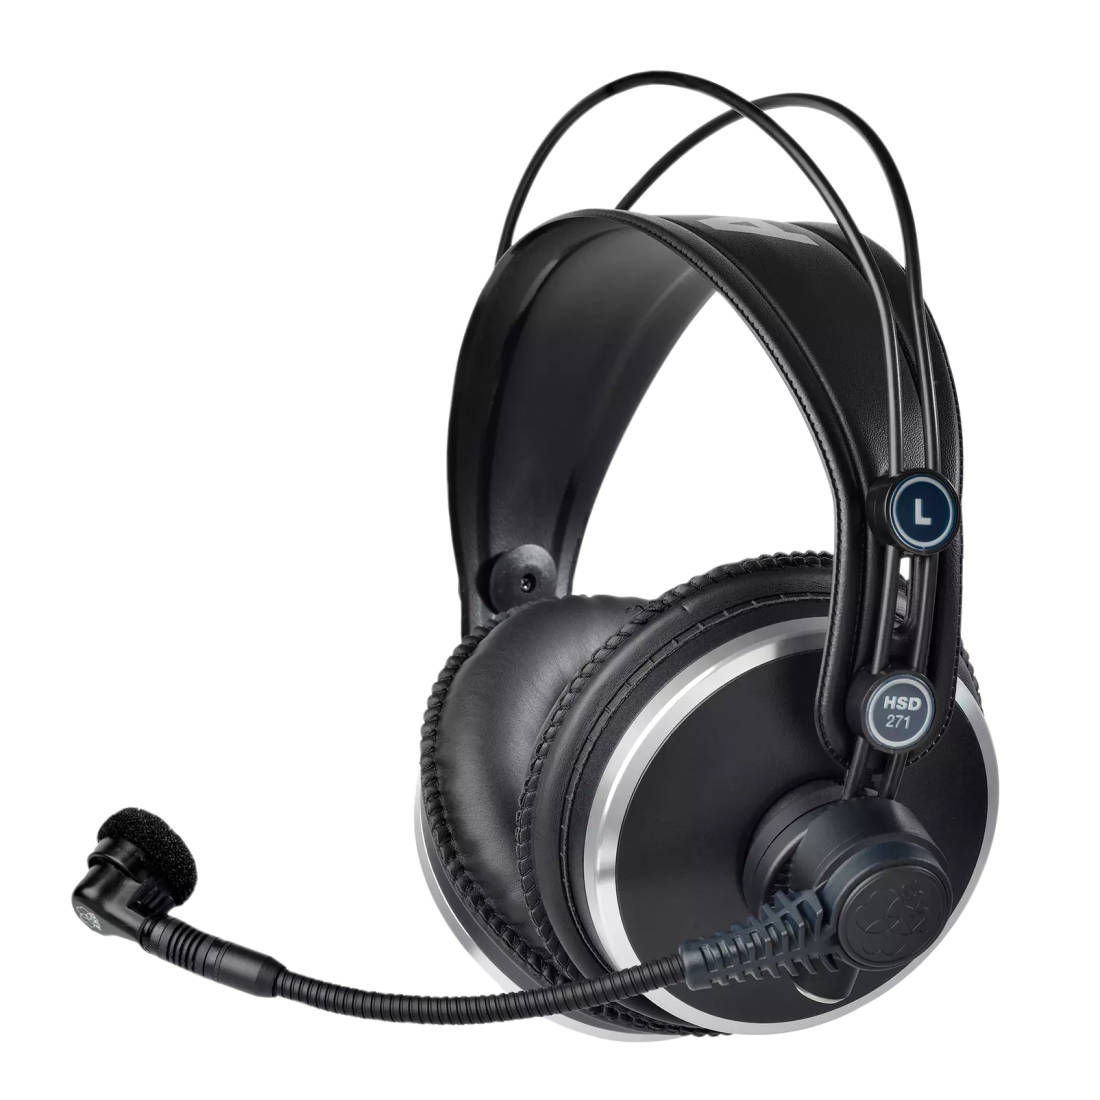 HSD271 Professional Over-Ear Headset with Dynamic Microphone